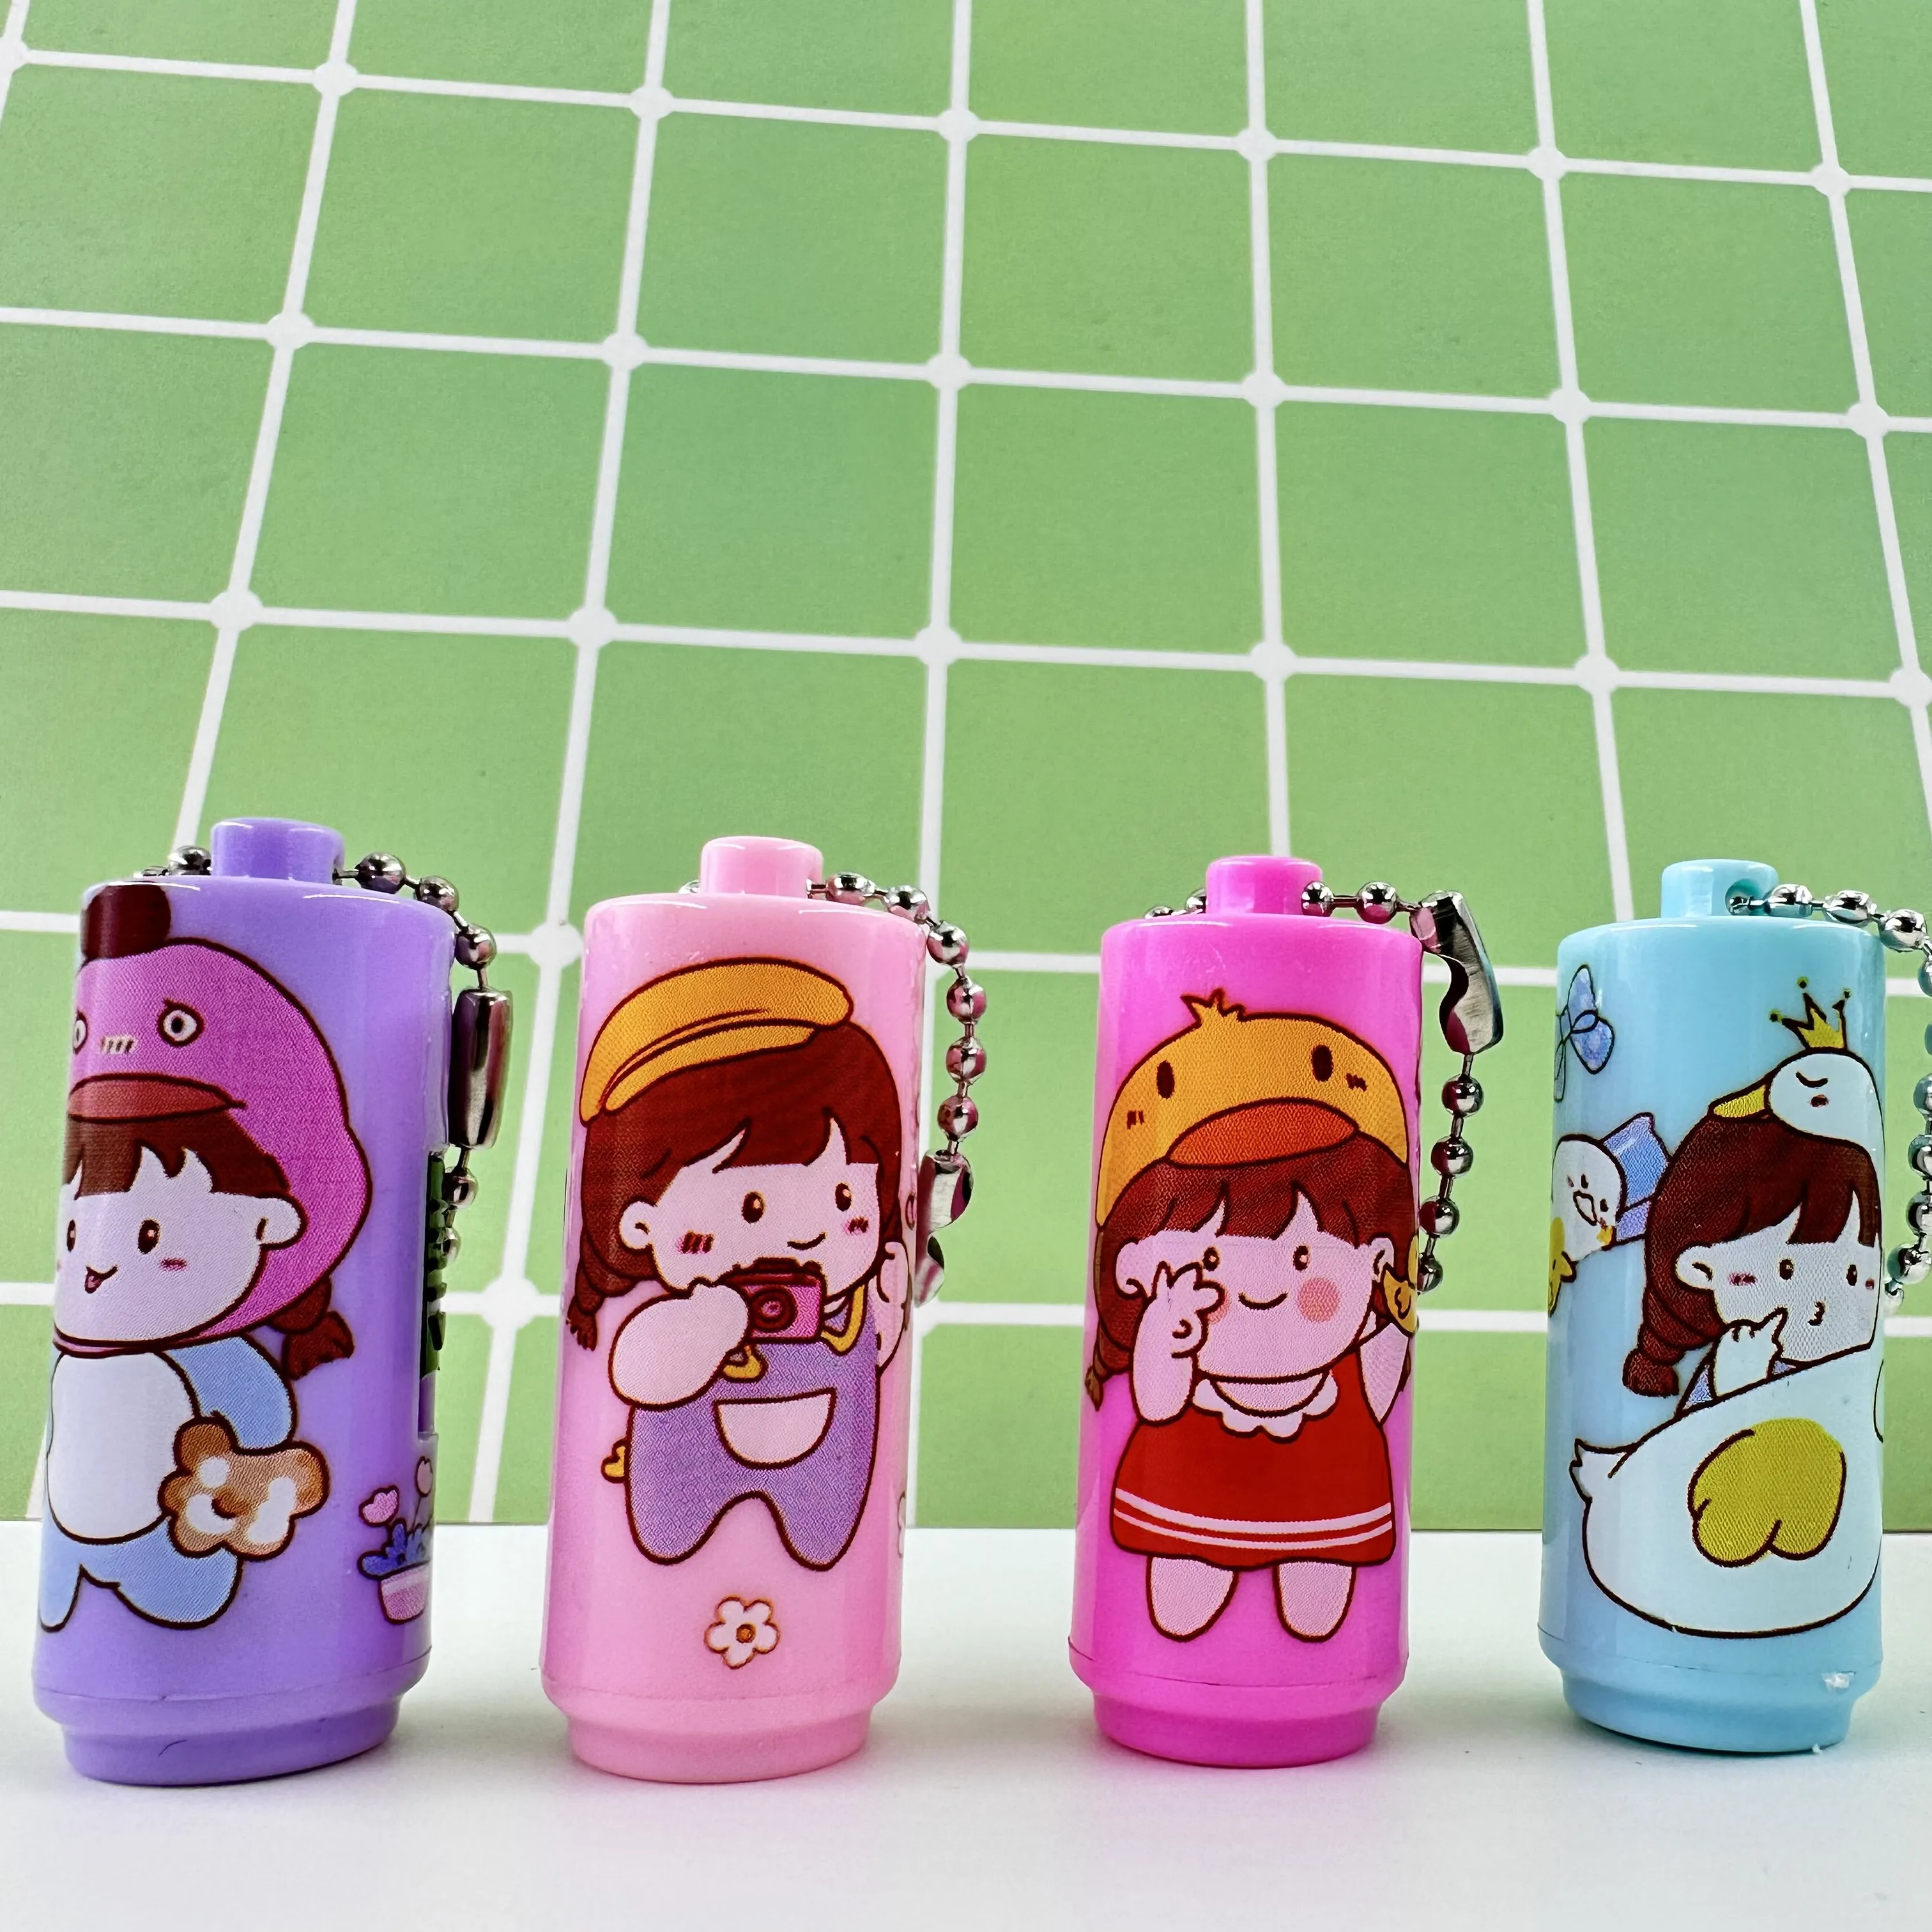 Wholesale Low Price Little Girl Cartoon Design LED Keychain Round Plastic Material Keychain For Sale